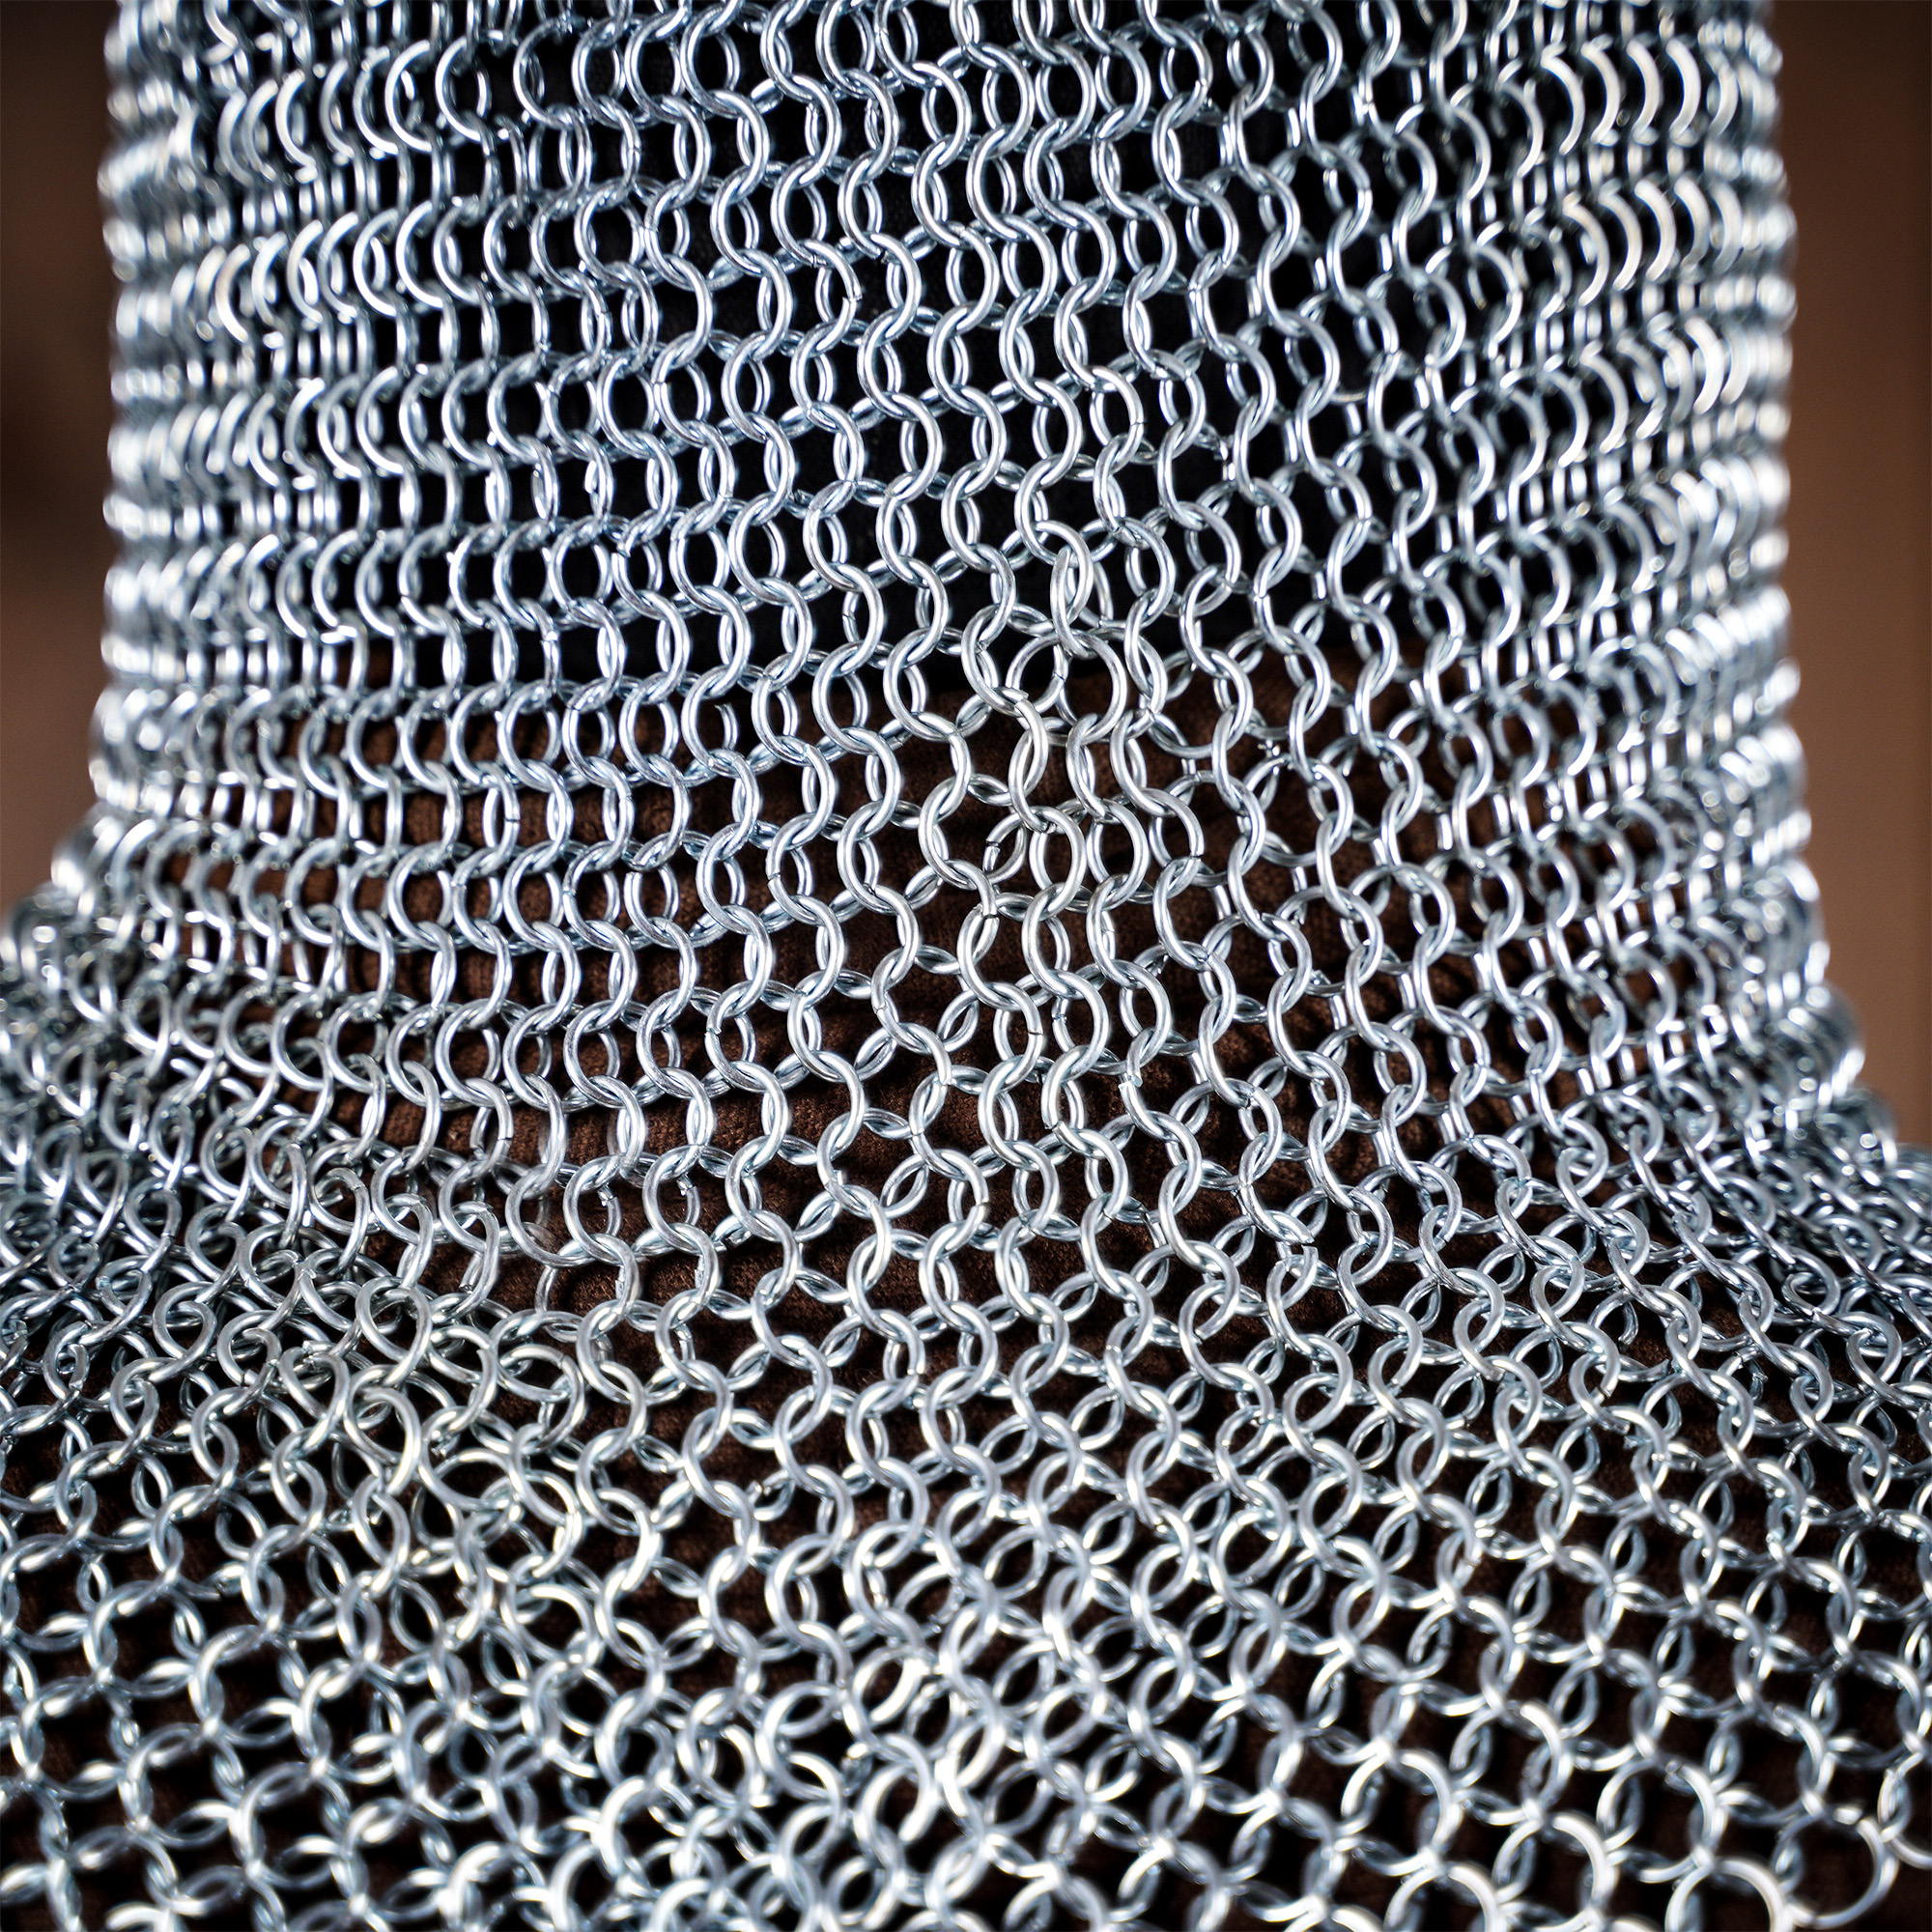 Aluminium.Chain Mail, 10 mm, Butted Hood, Knight Armour, Round Neck